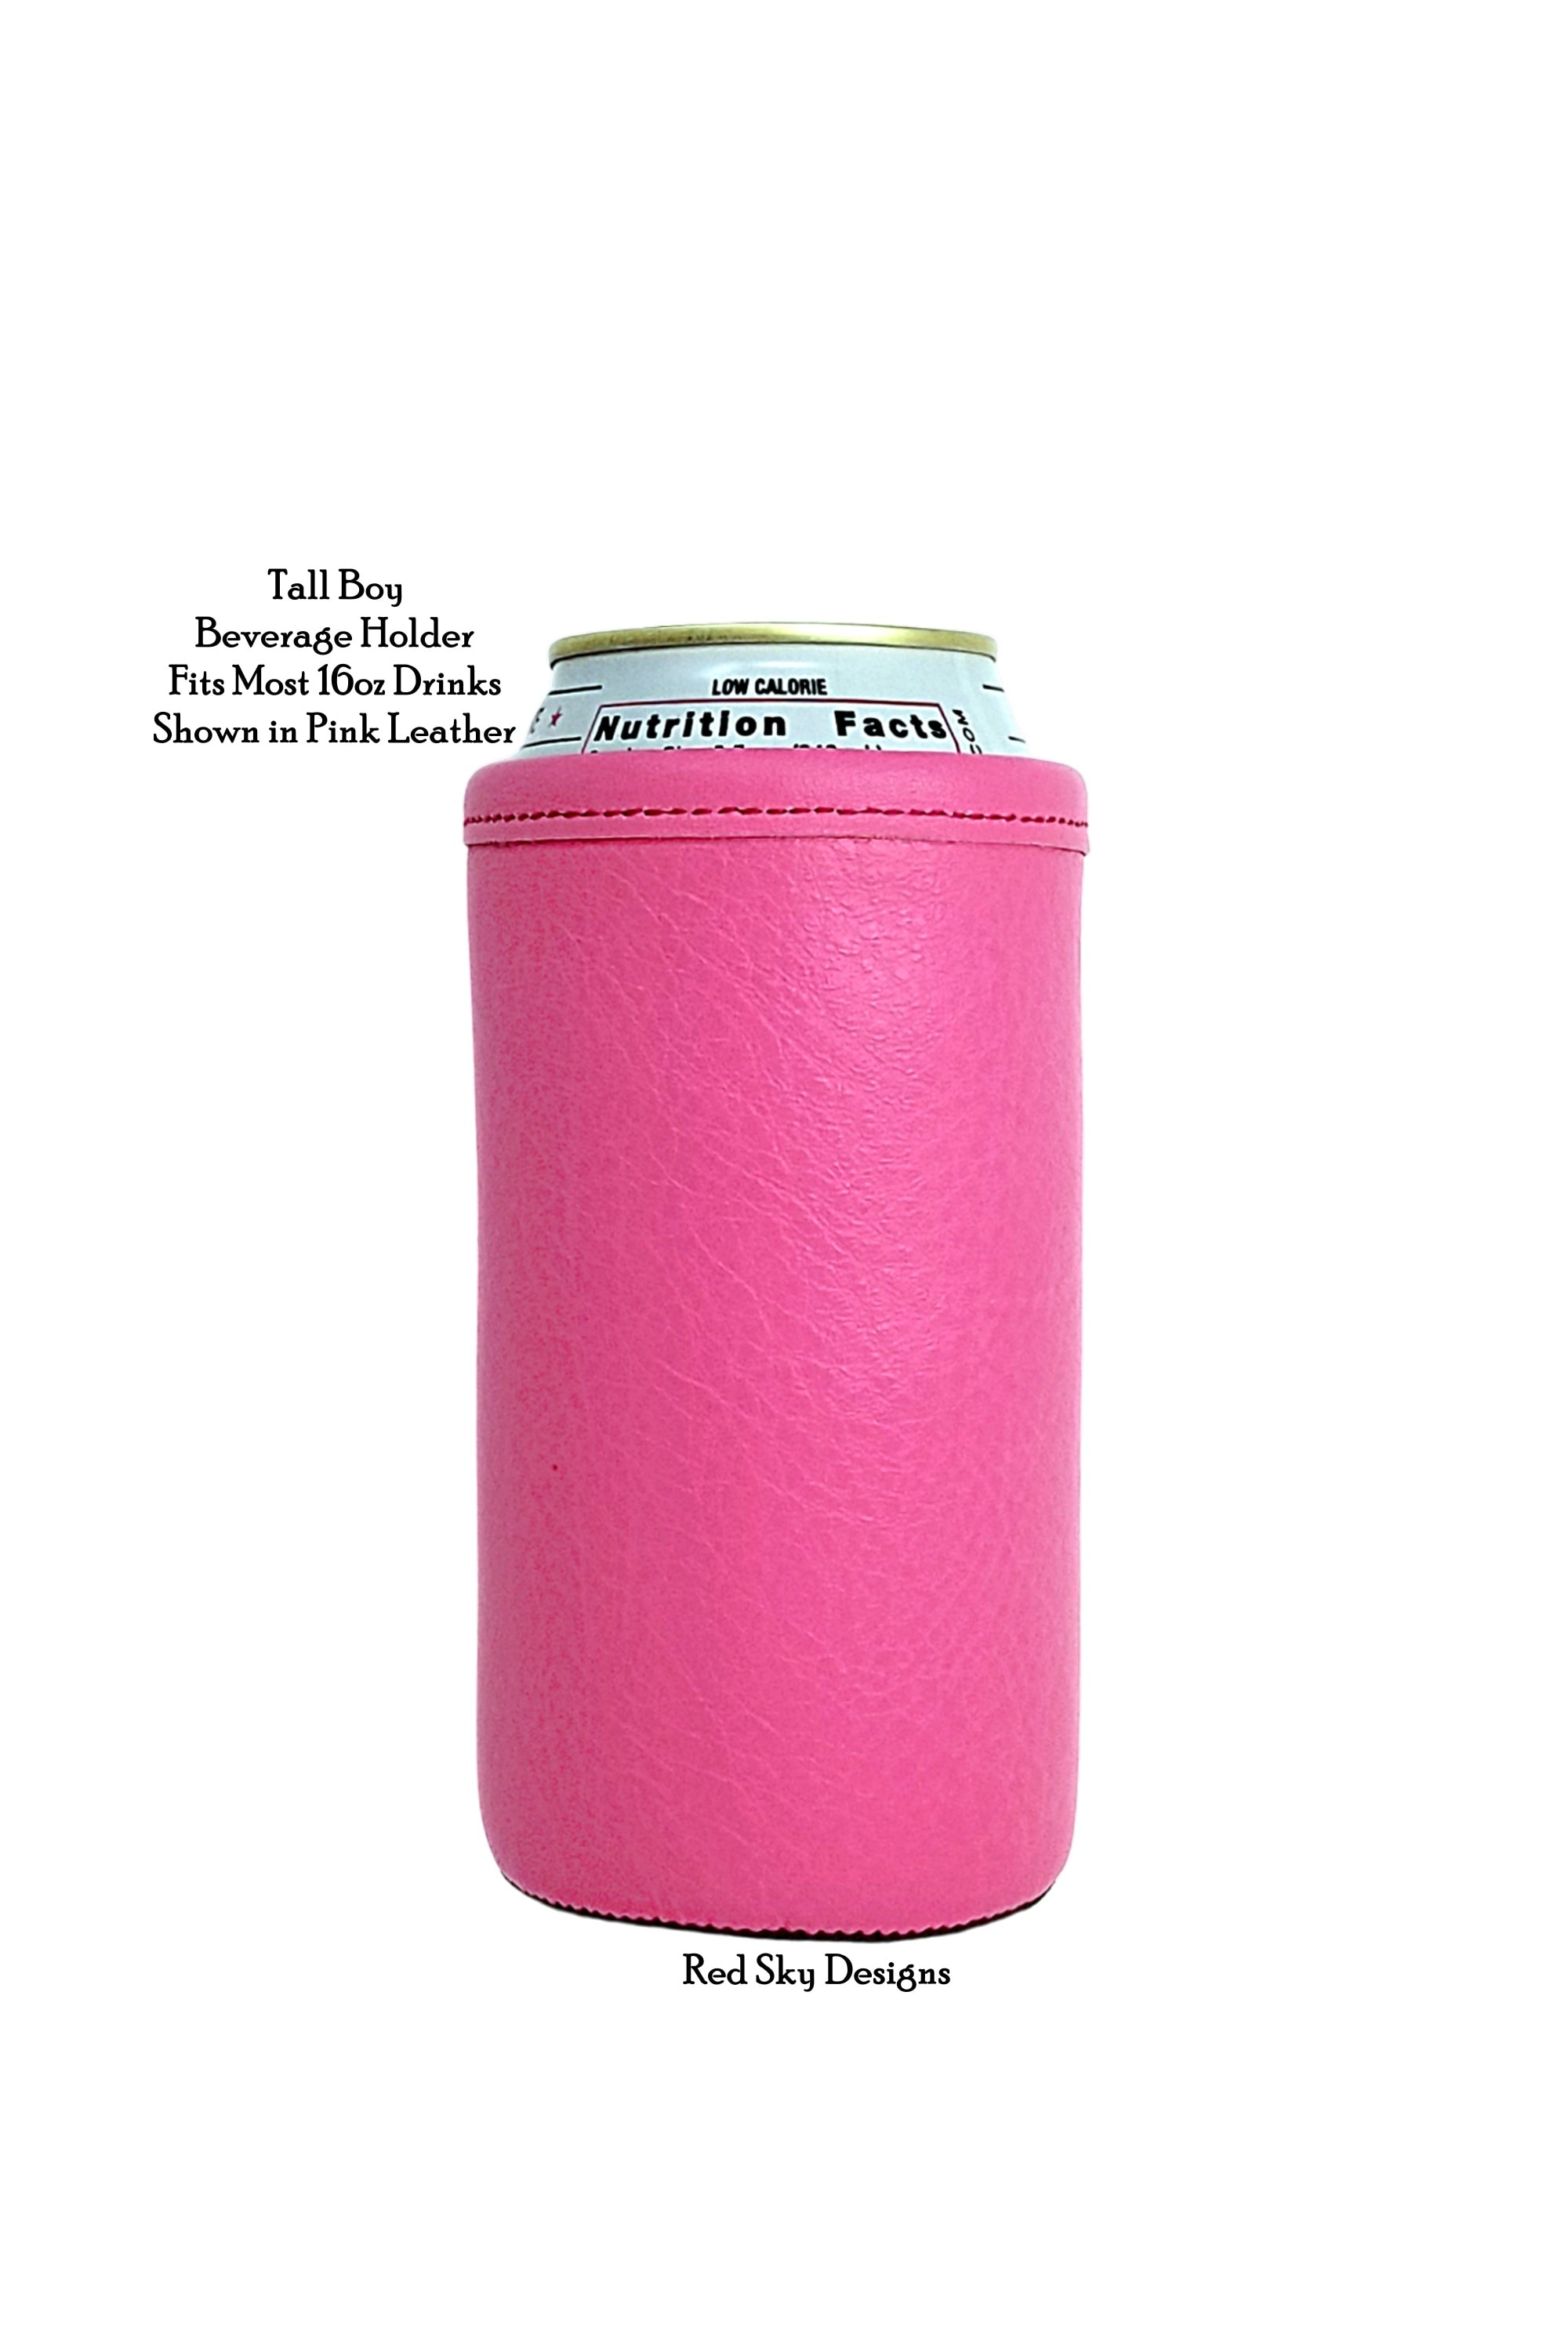 This Guy Needs a Beer Tall Boy Stainless Steel Koozie – DIYxe